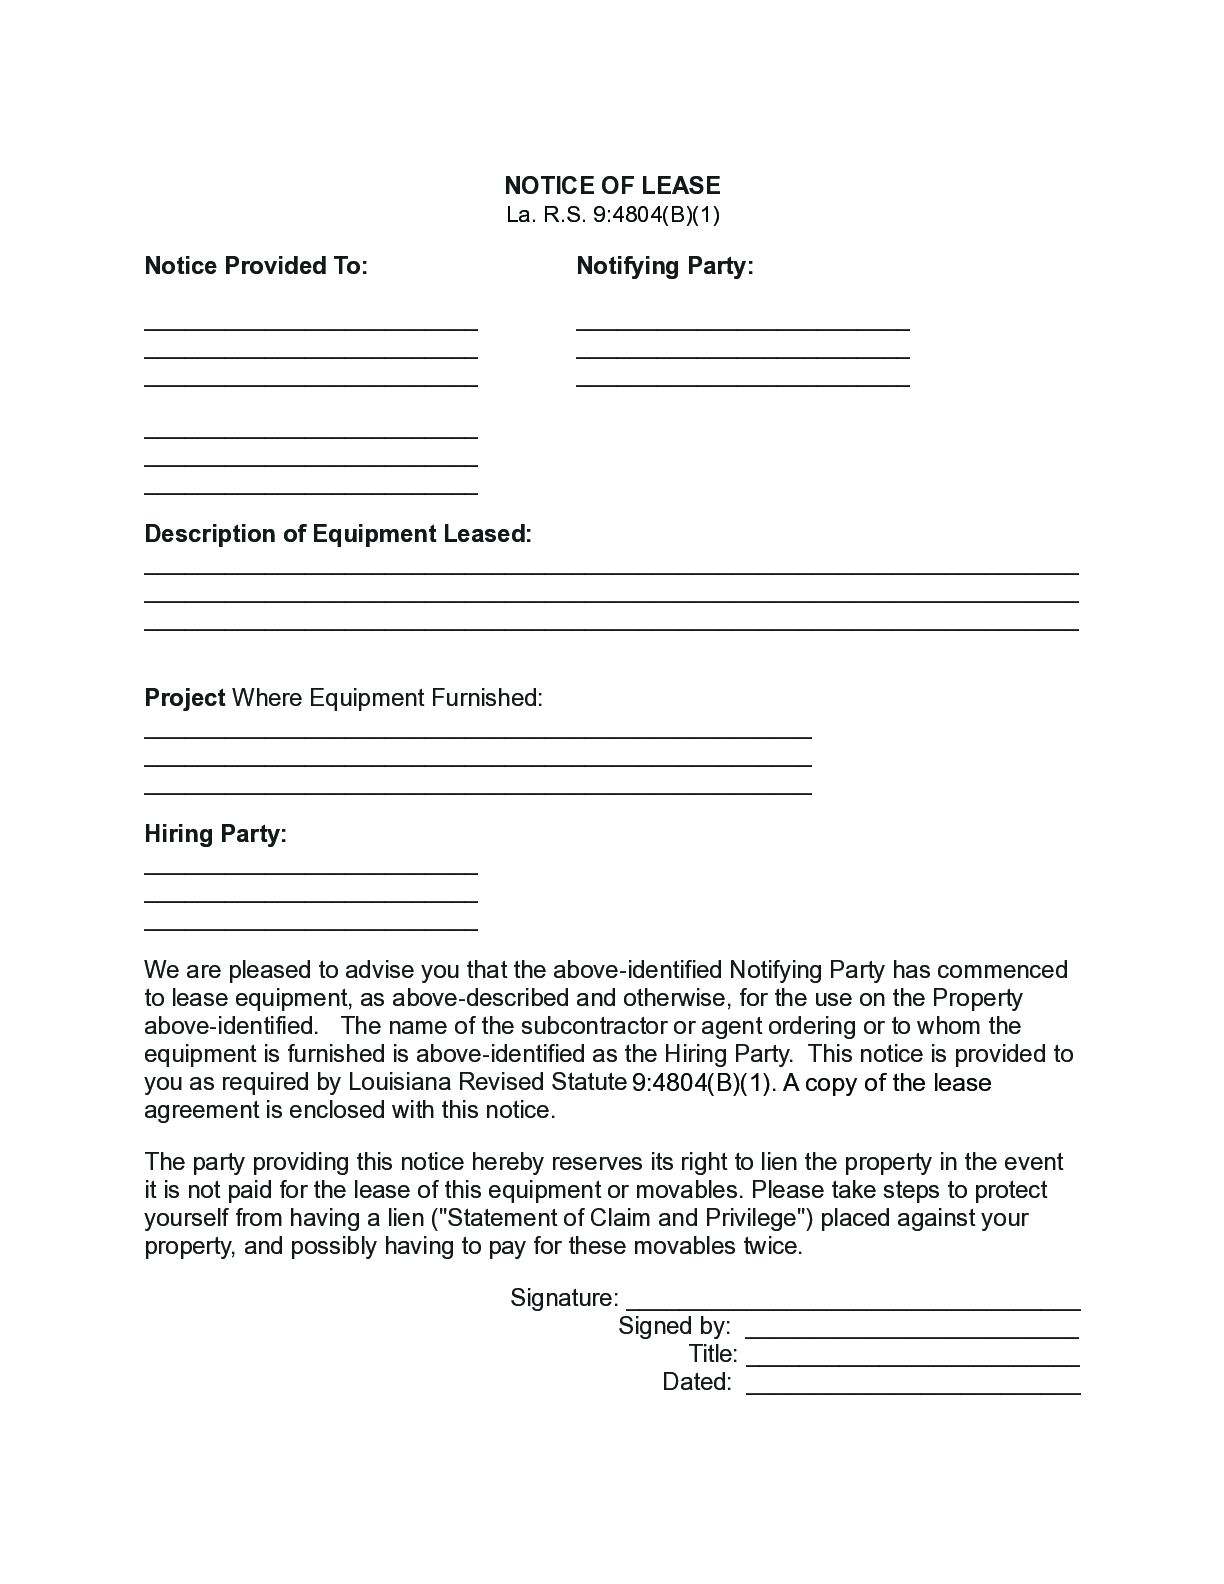 Louisiana Notice of Lease Form for Private Projects - free from